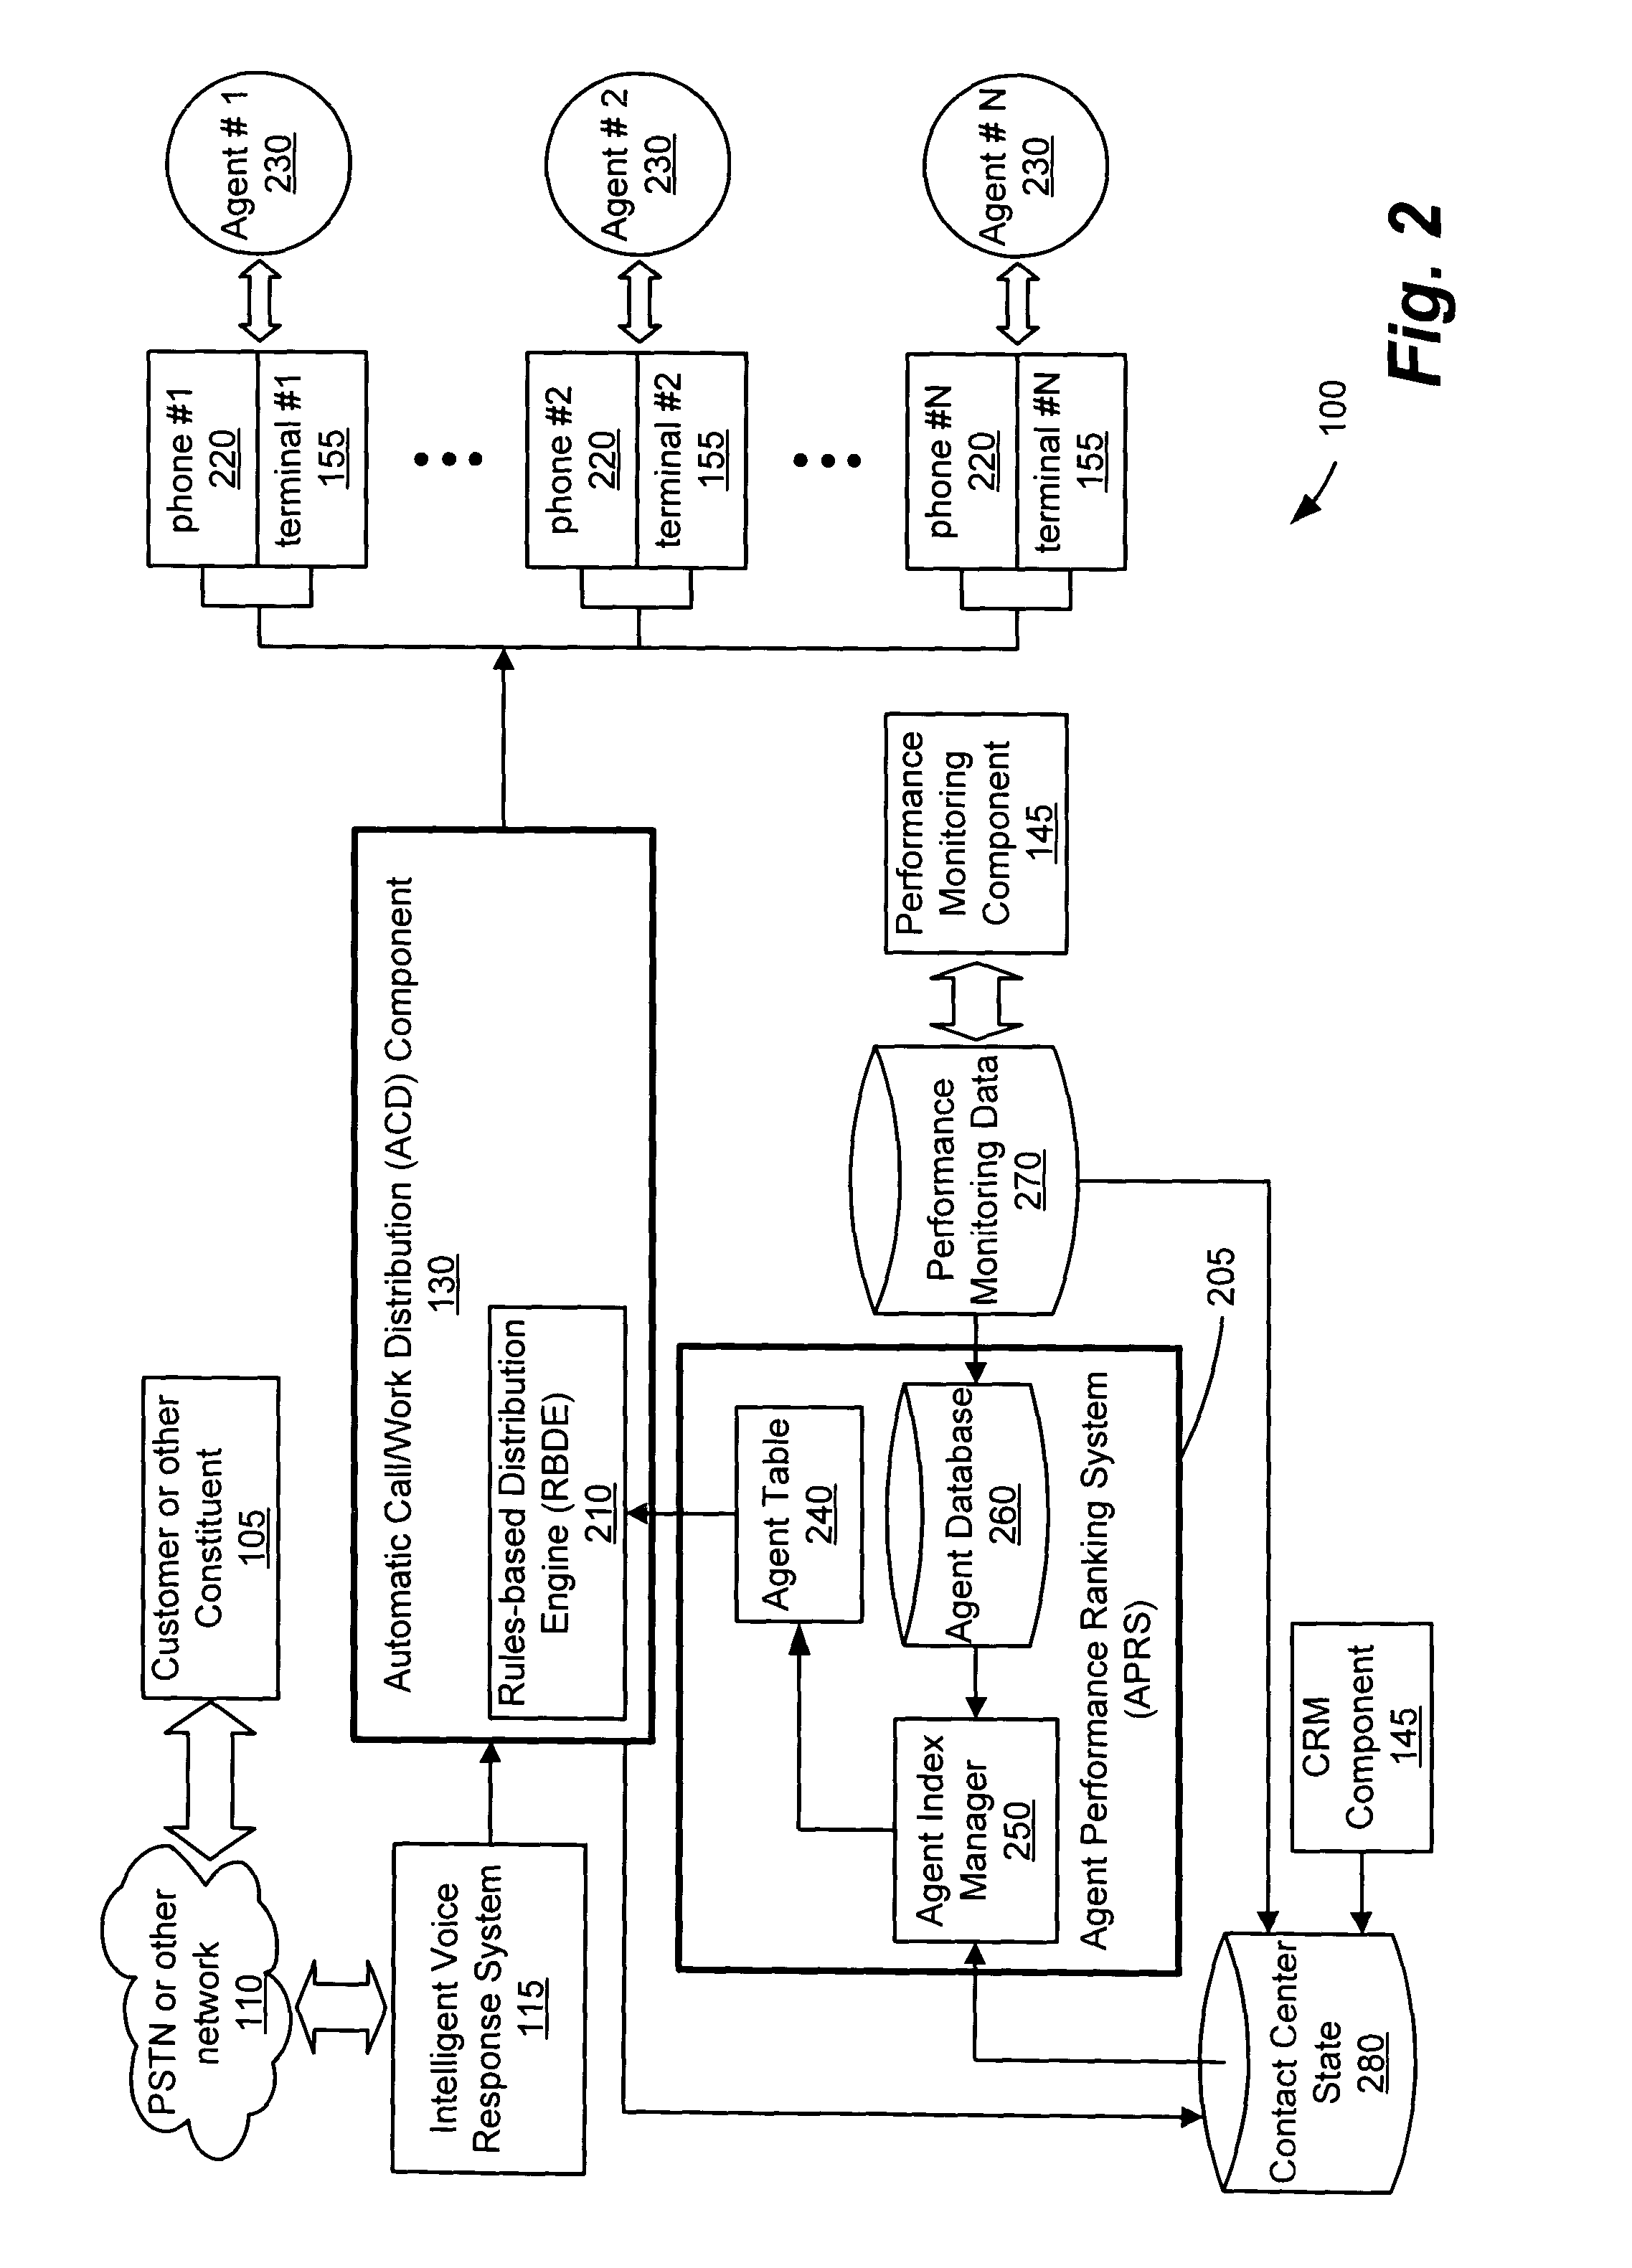 Method and system for selecting a preferred contact center agent based on agent proficiency and performance and contact center state